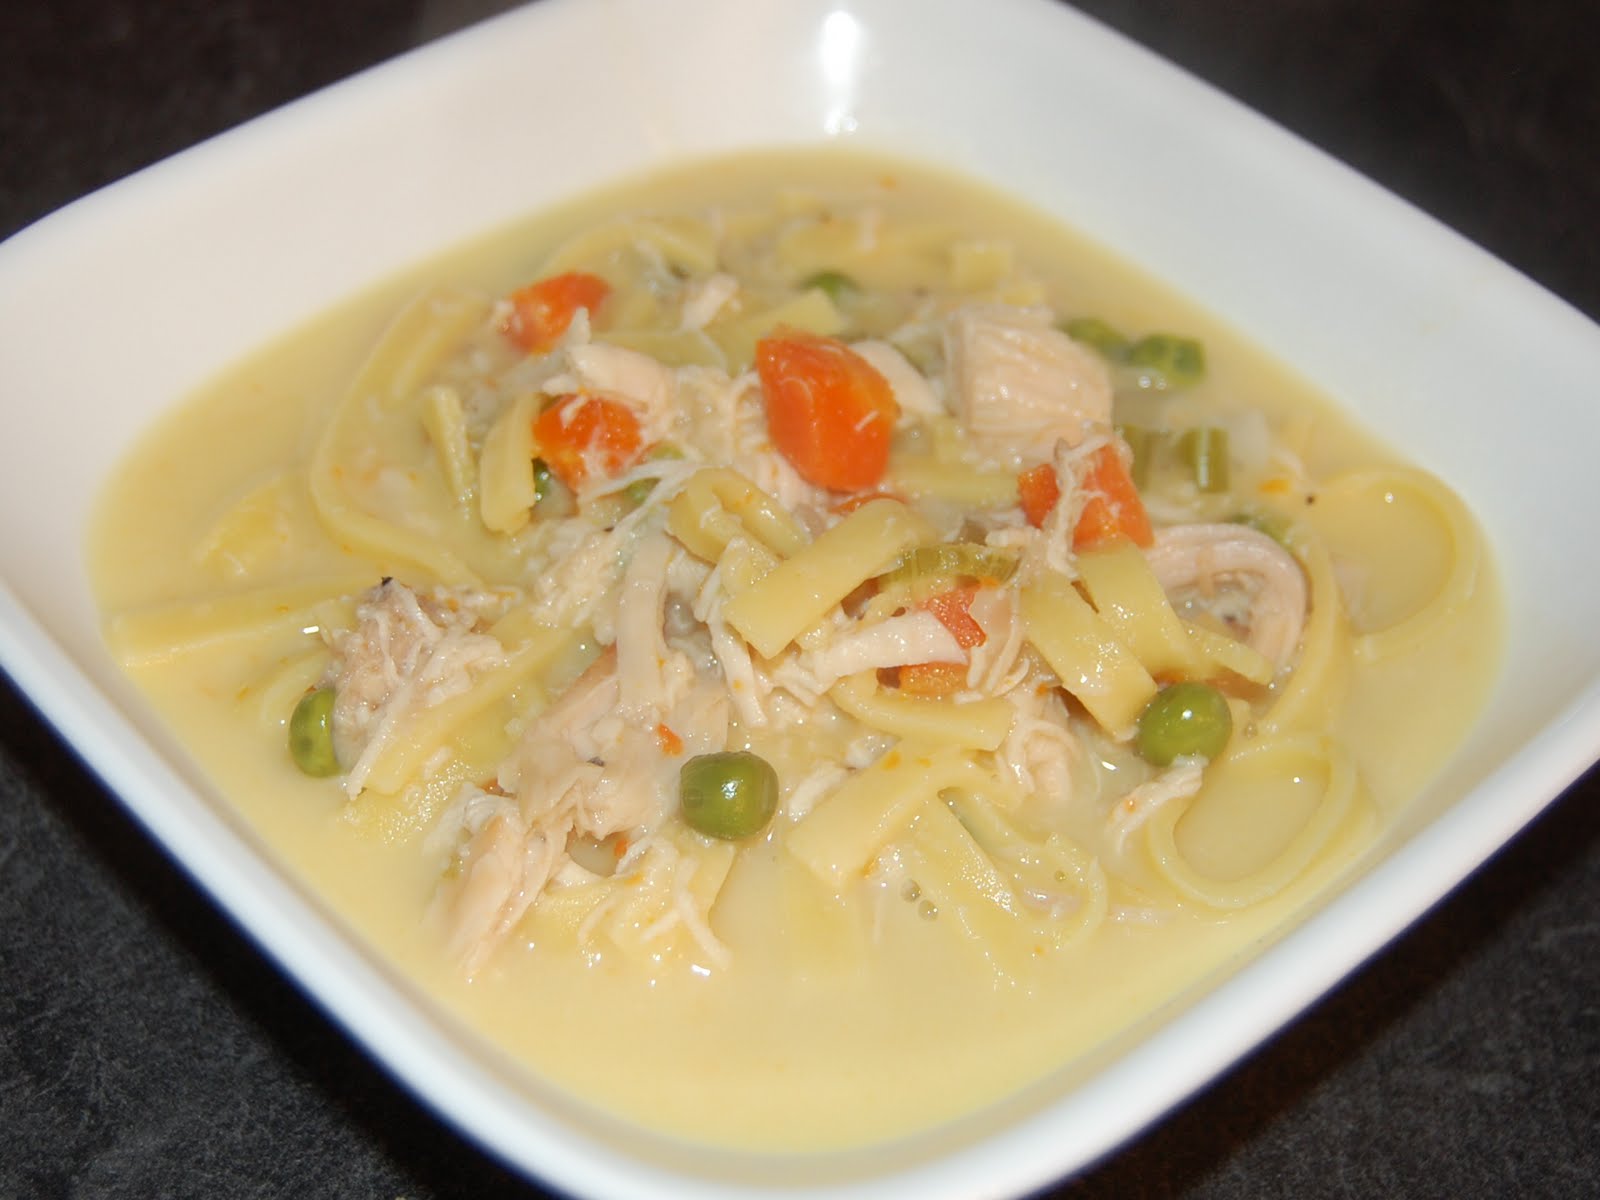 Chicken soup and spinach recipe oven, whole chicken noodle soup from ...